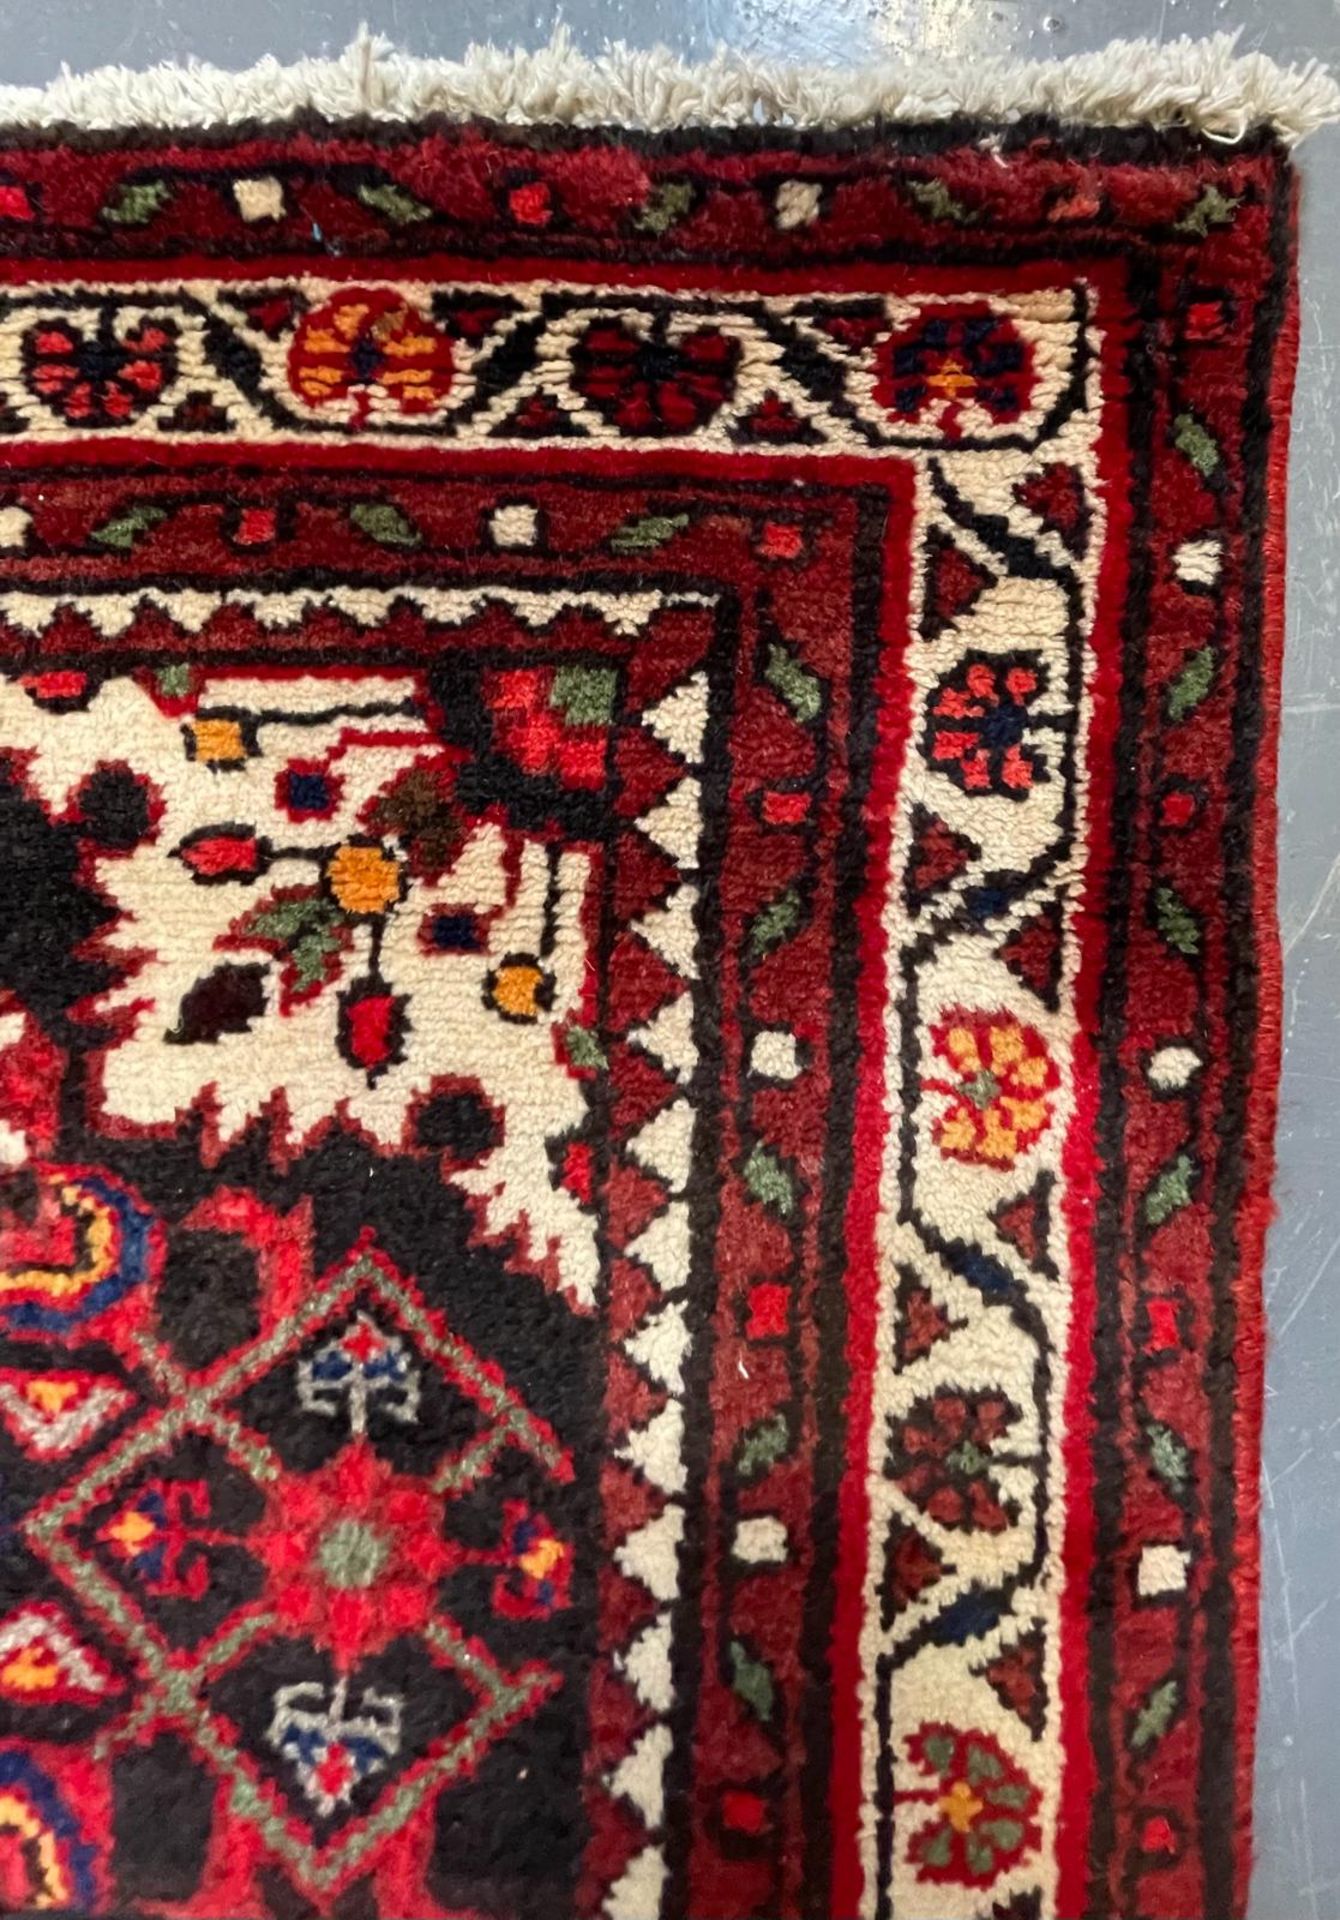 20TH CENTURY NORTH-WEST PERSIAN MALEYER RUNNER RUG - Image 3 of 5